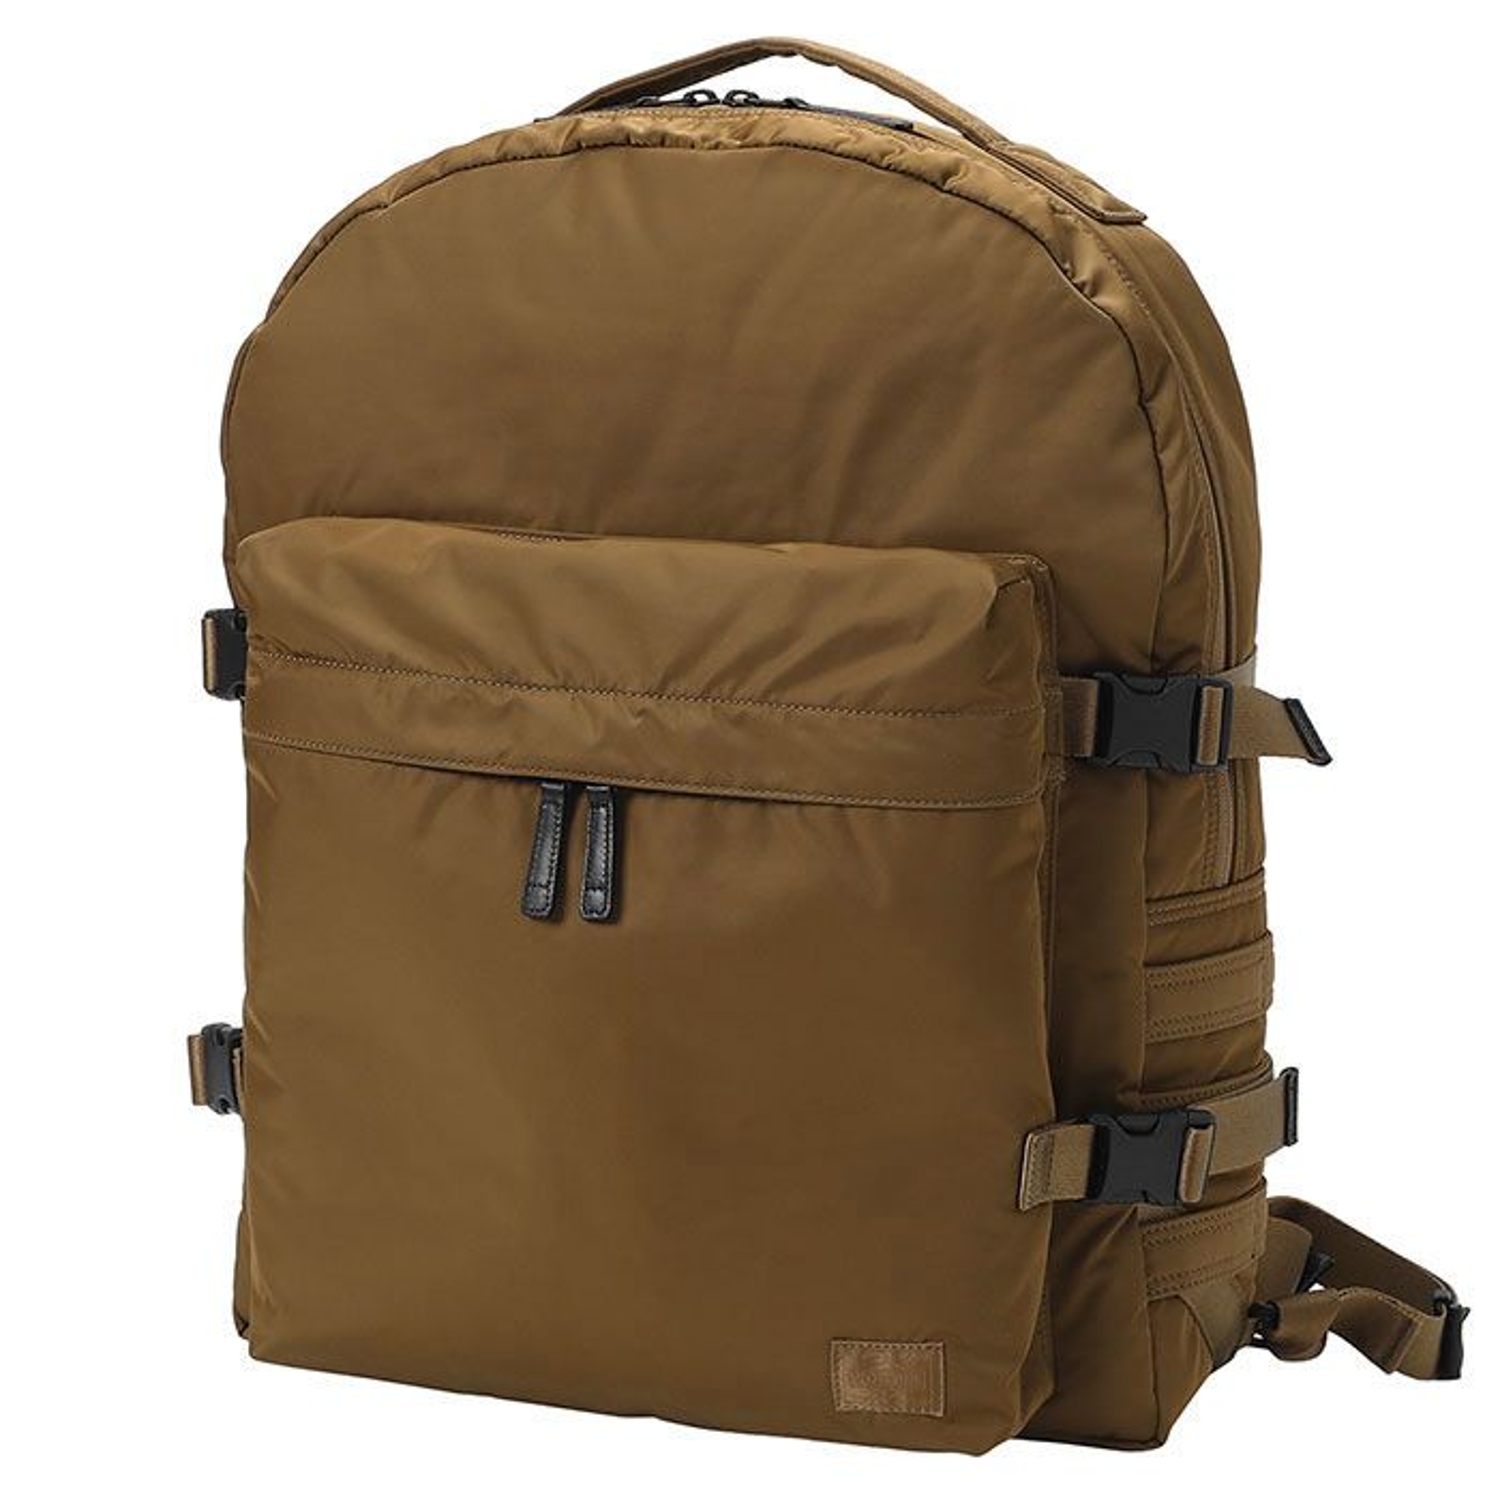 PORTER / PORTER FORCE DICROS SOLO / DAYPACK (105540)